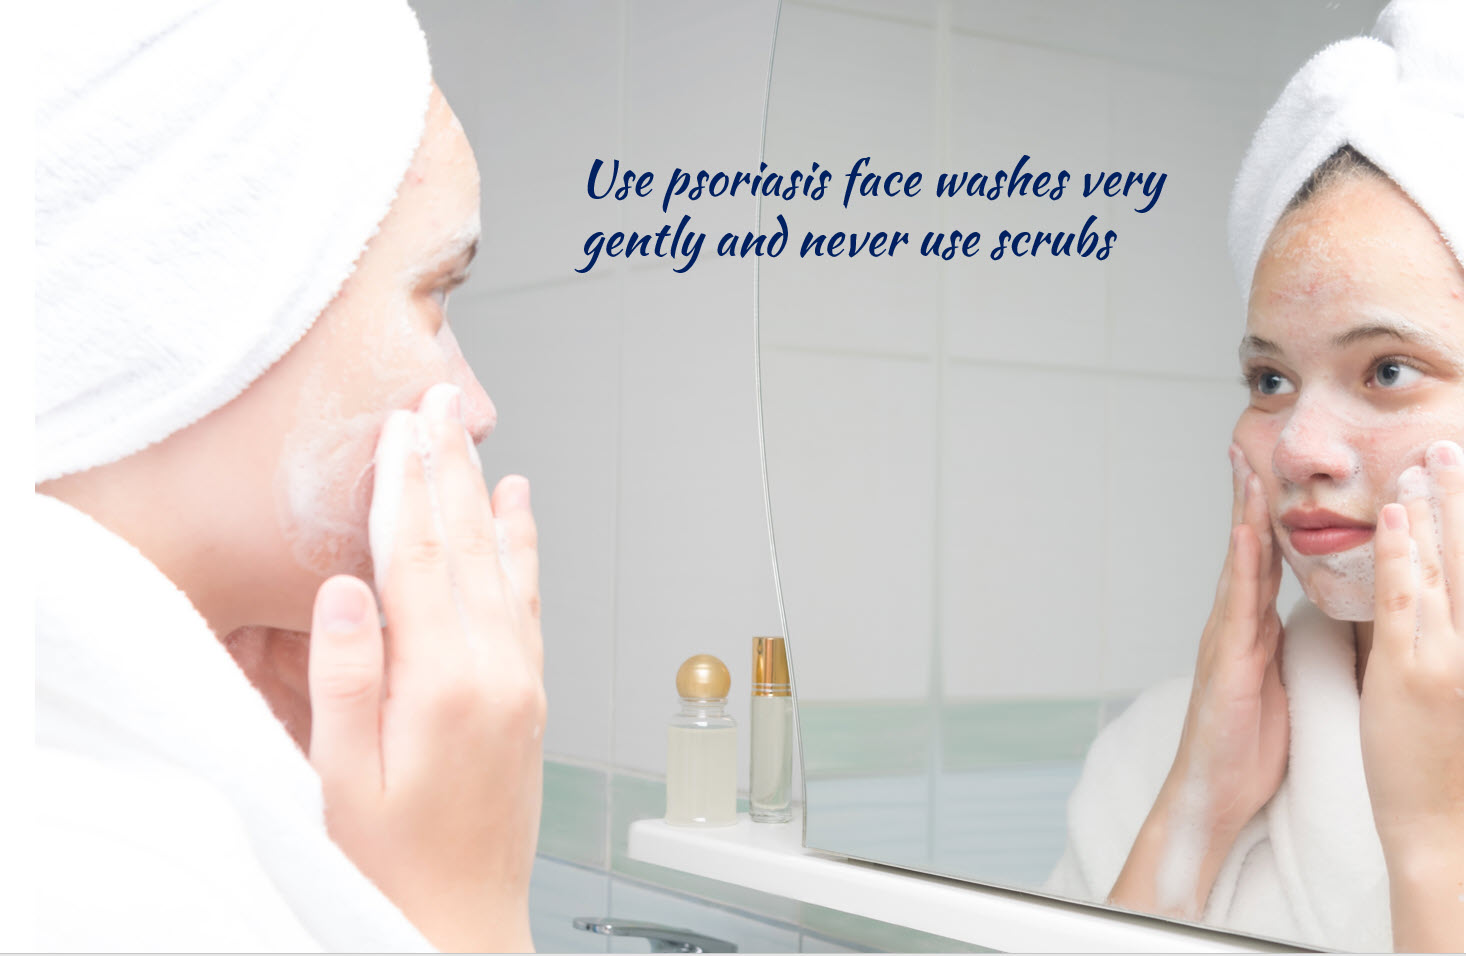 use psoriasis face washes very gently